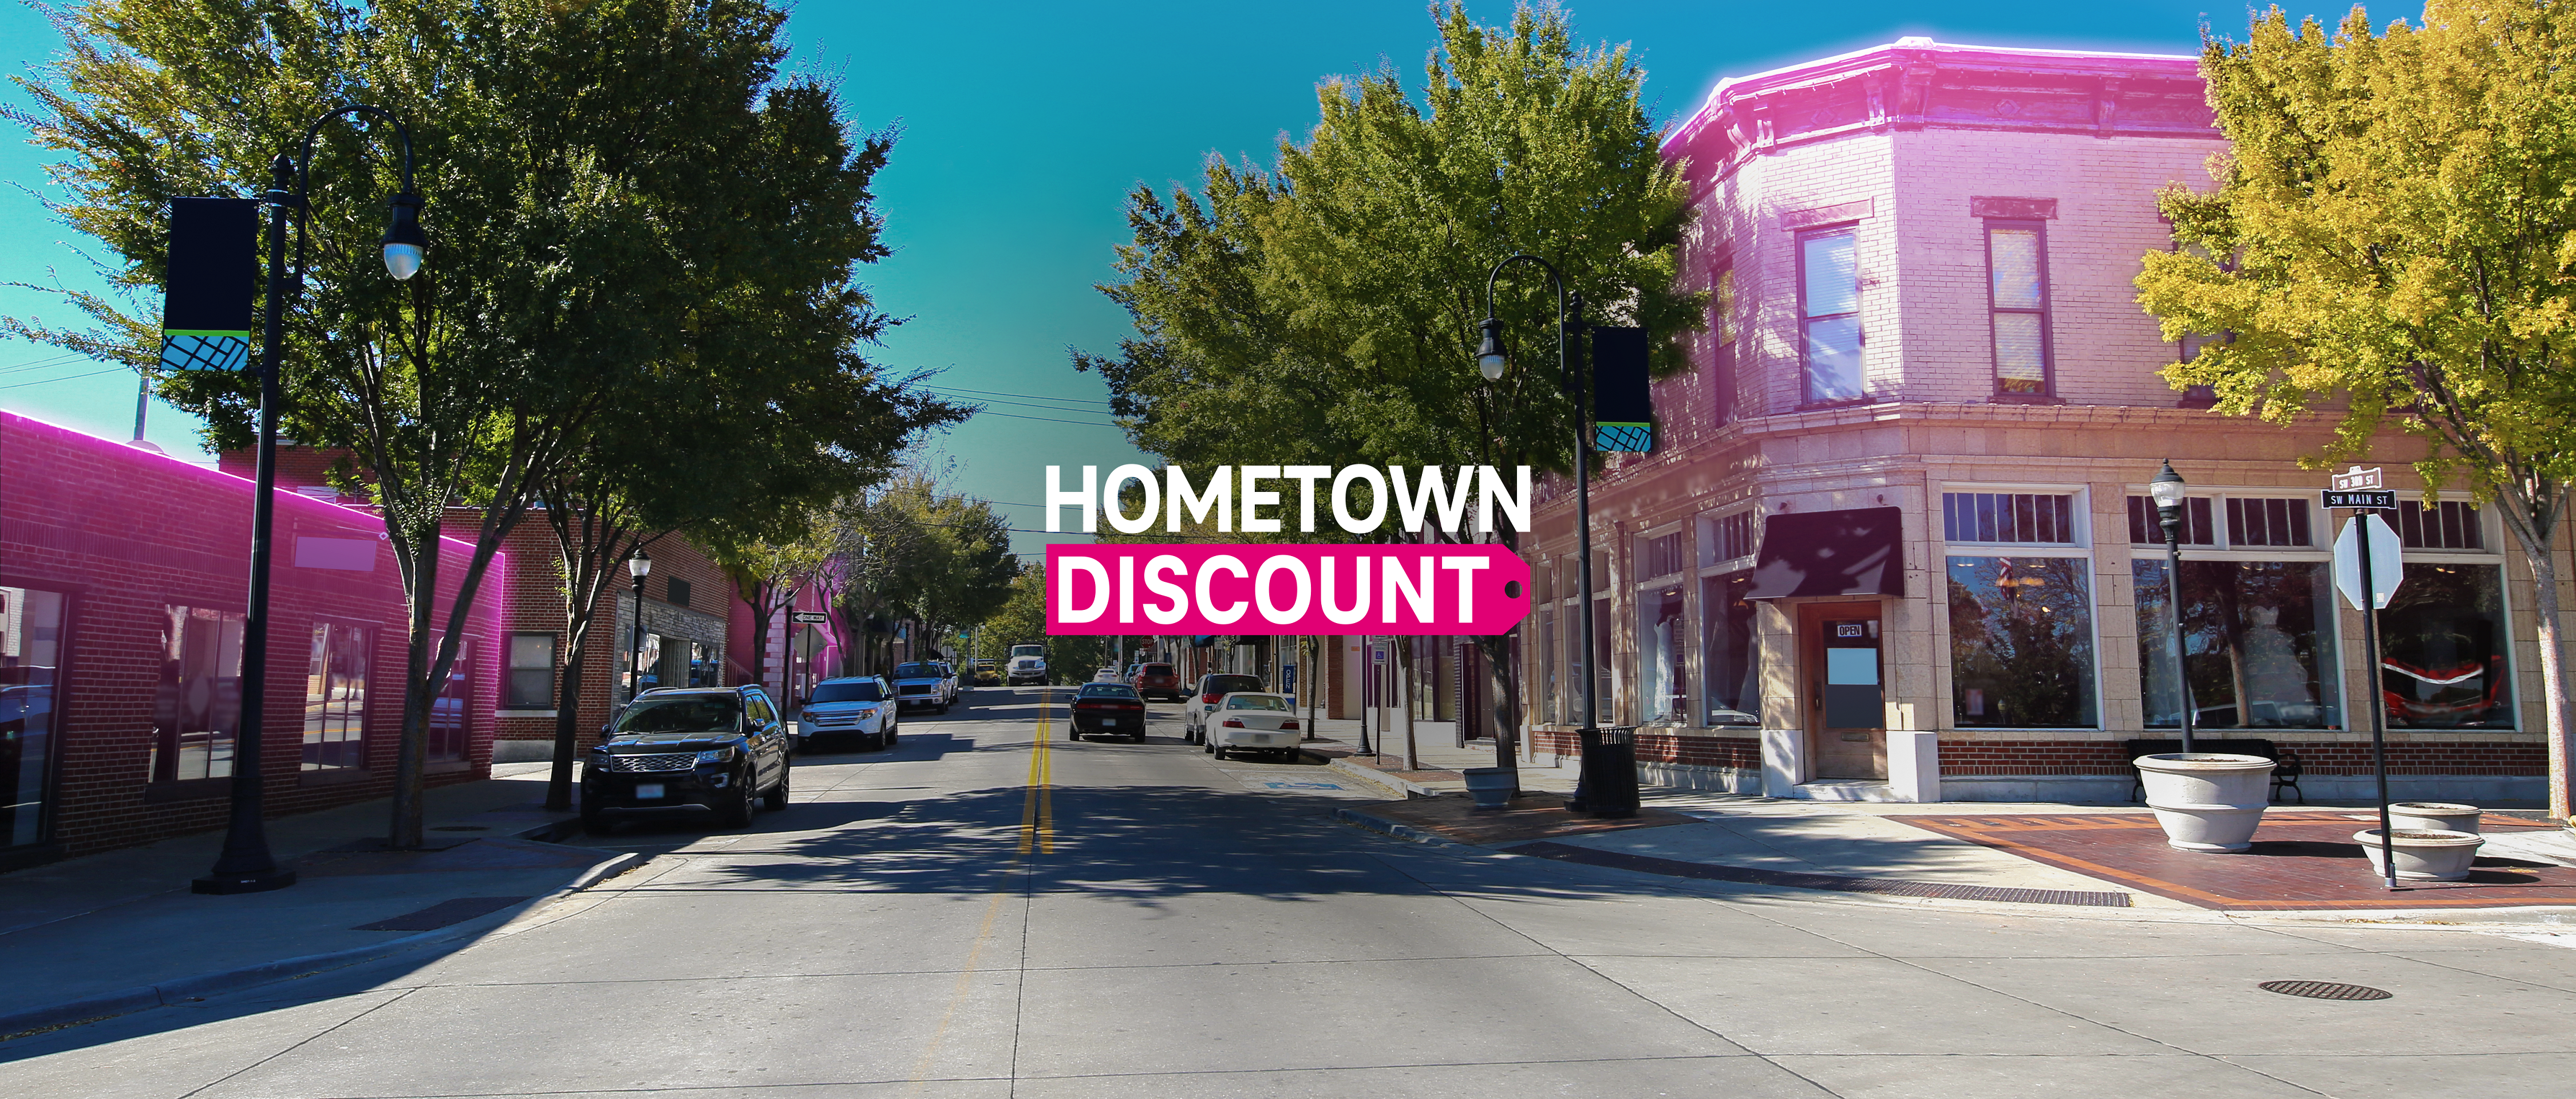 Main street in a small town with some buildings highlighted with magenta accents and the Hometown Discount logo overlayed